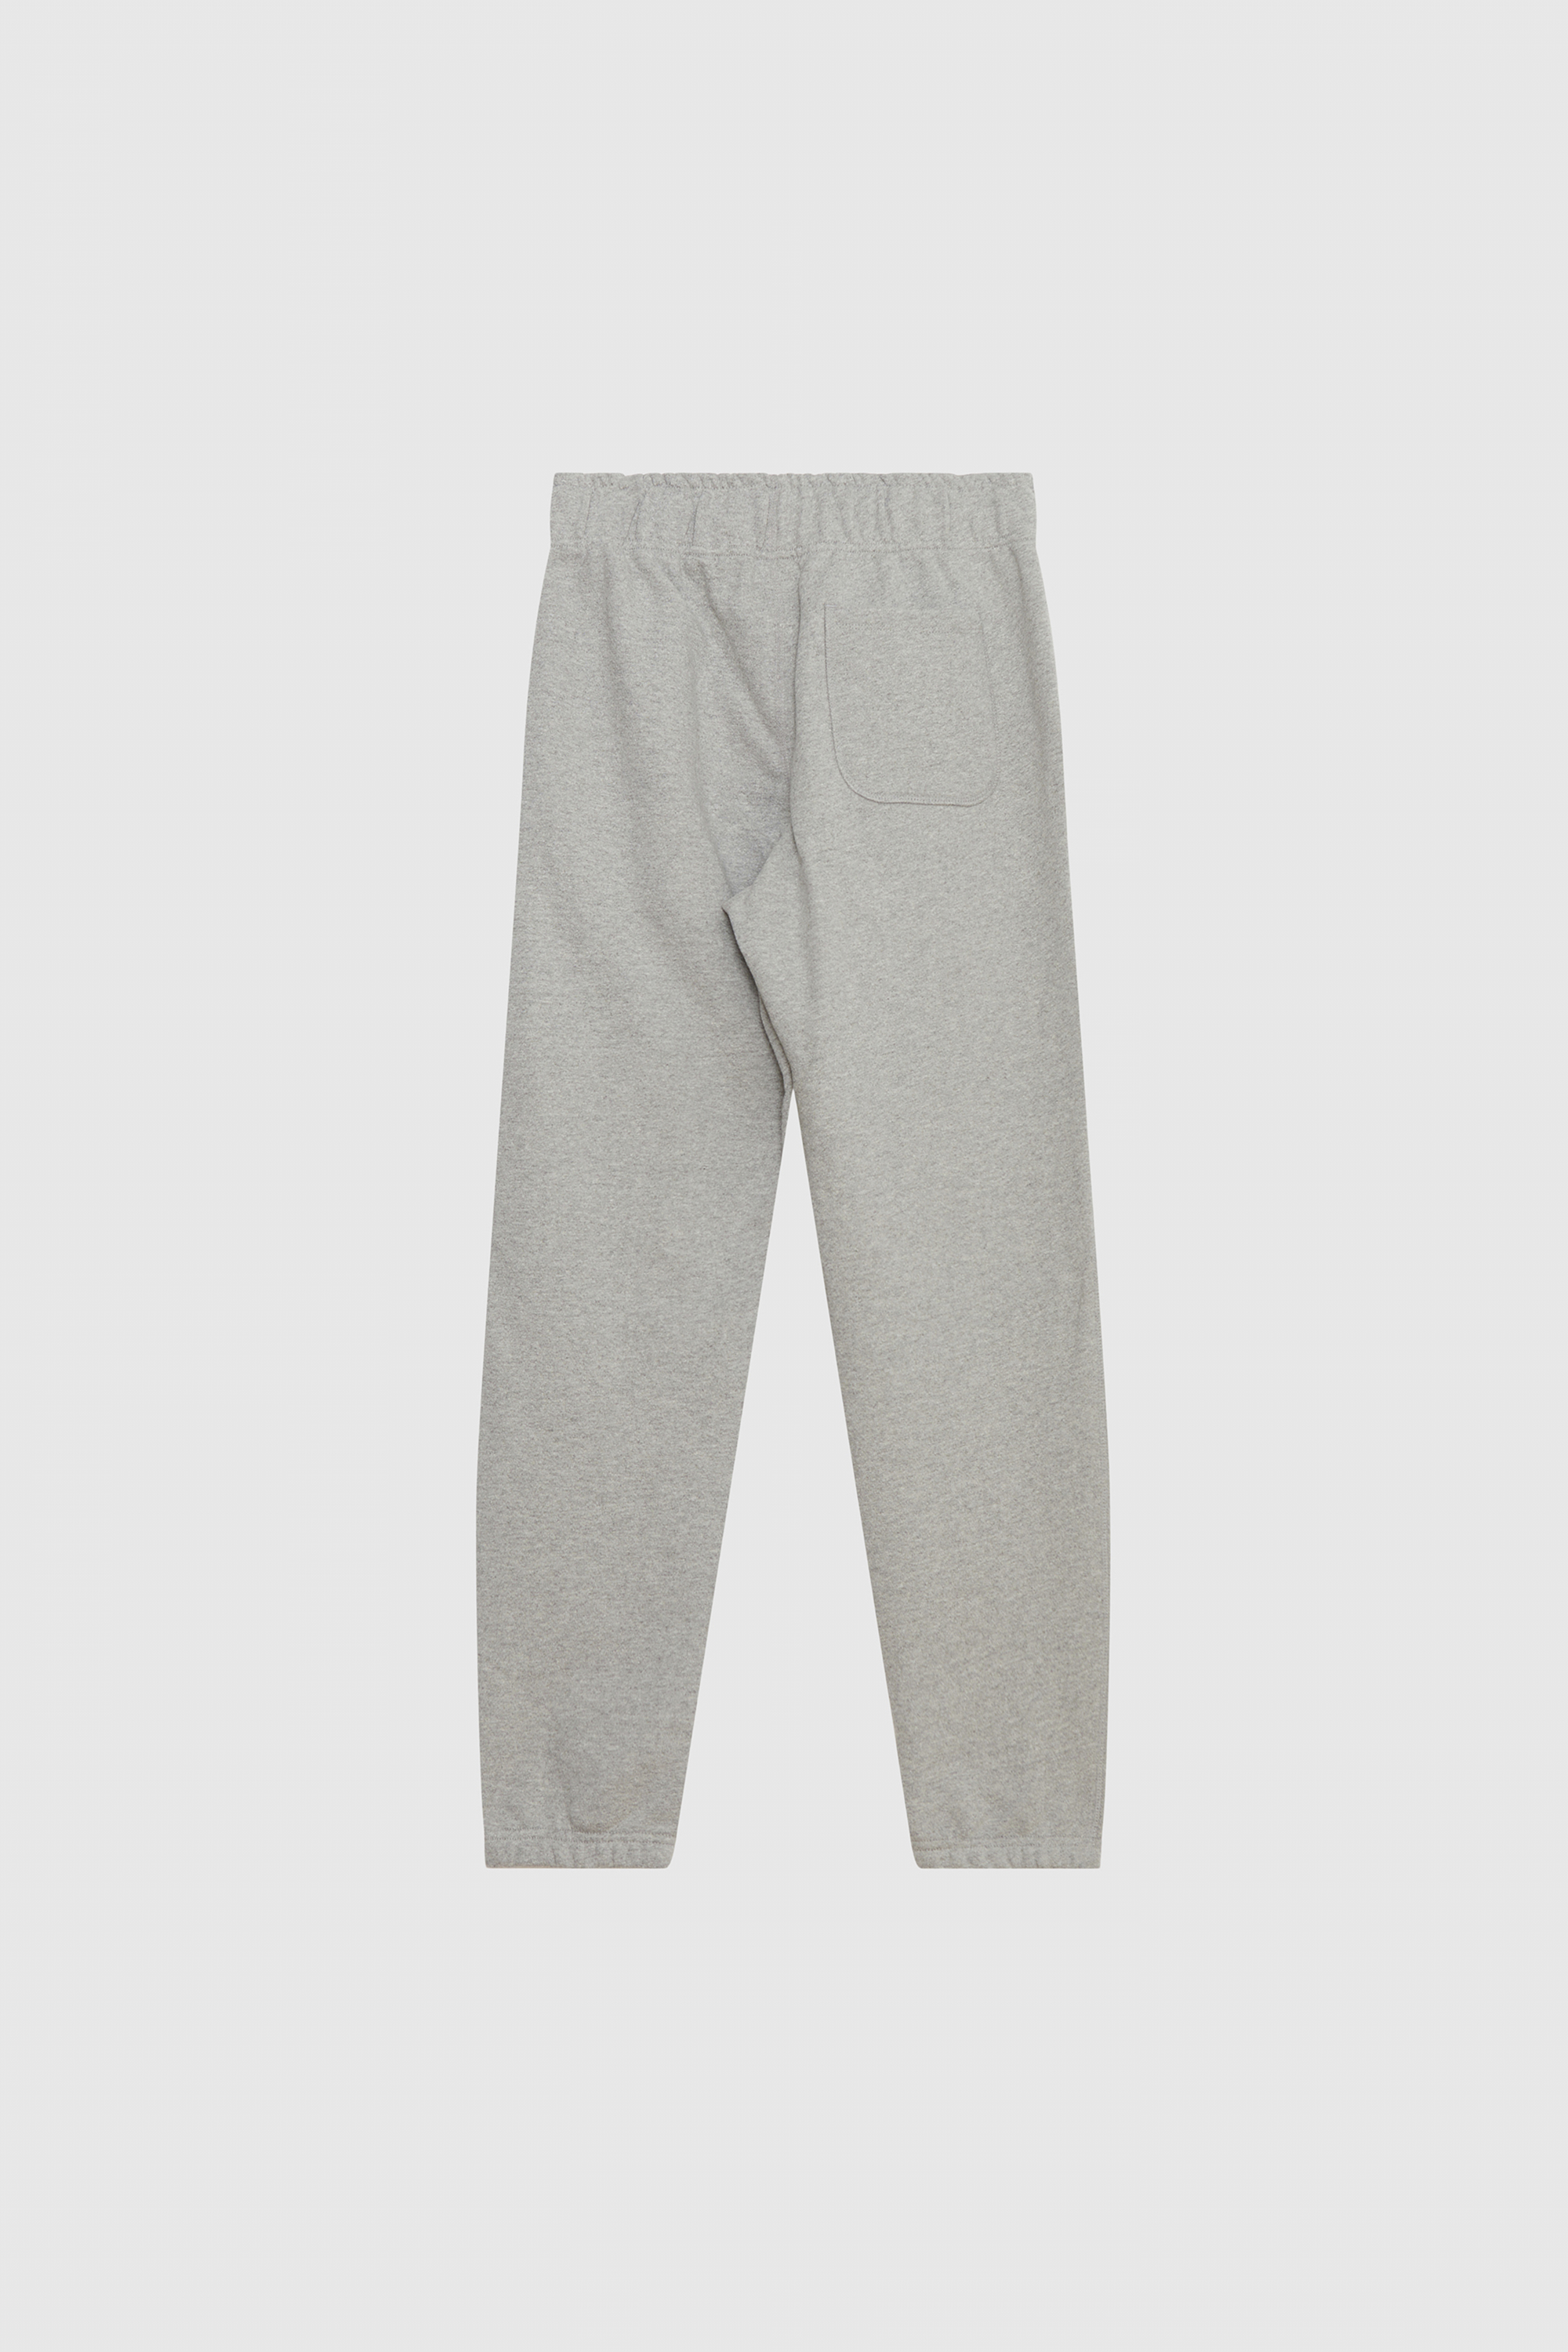 New Balance Made In USA Core Sweatpants Athletic grey | WoodWood.com